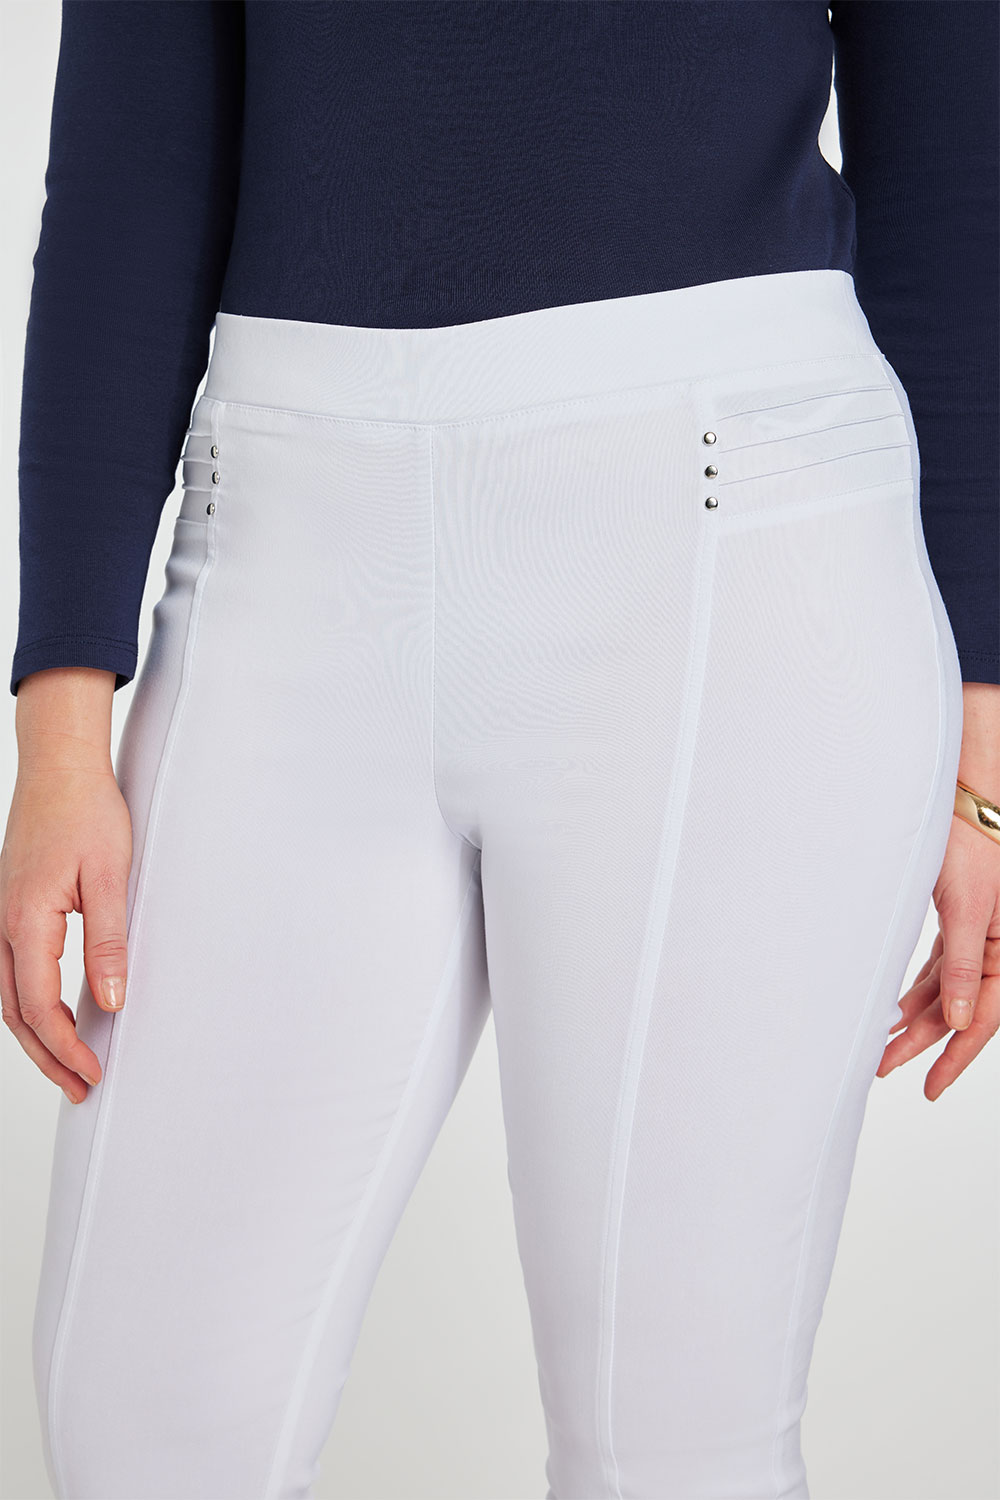 Bengaline Cropped Trousers with Biker Detail | Bonmarché